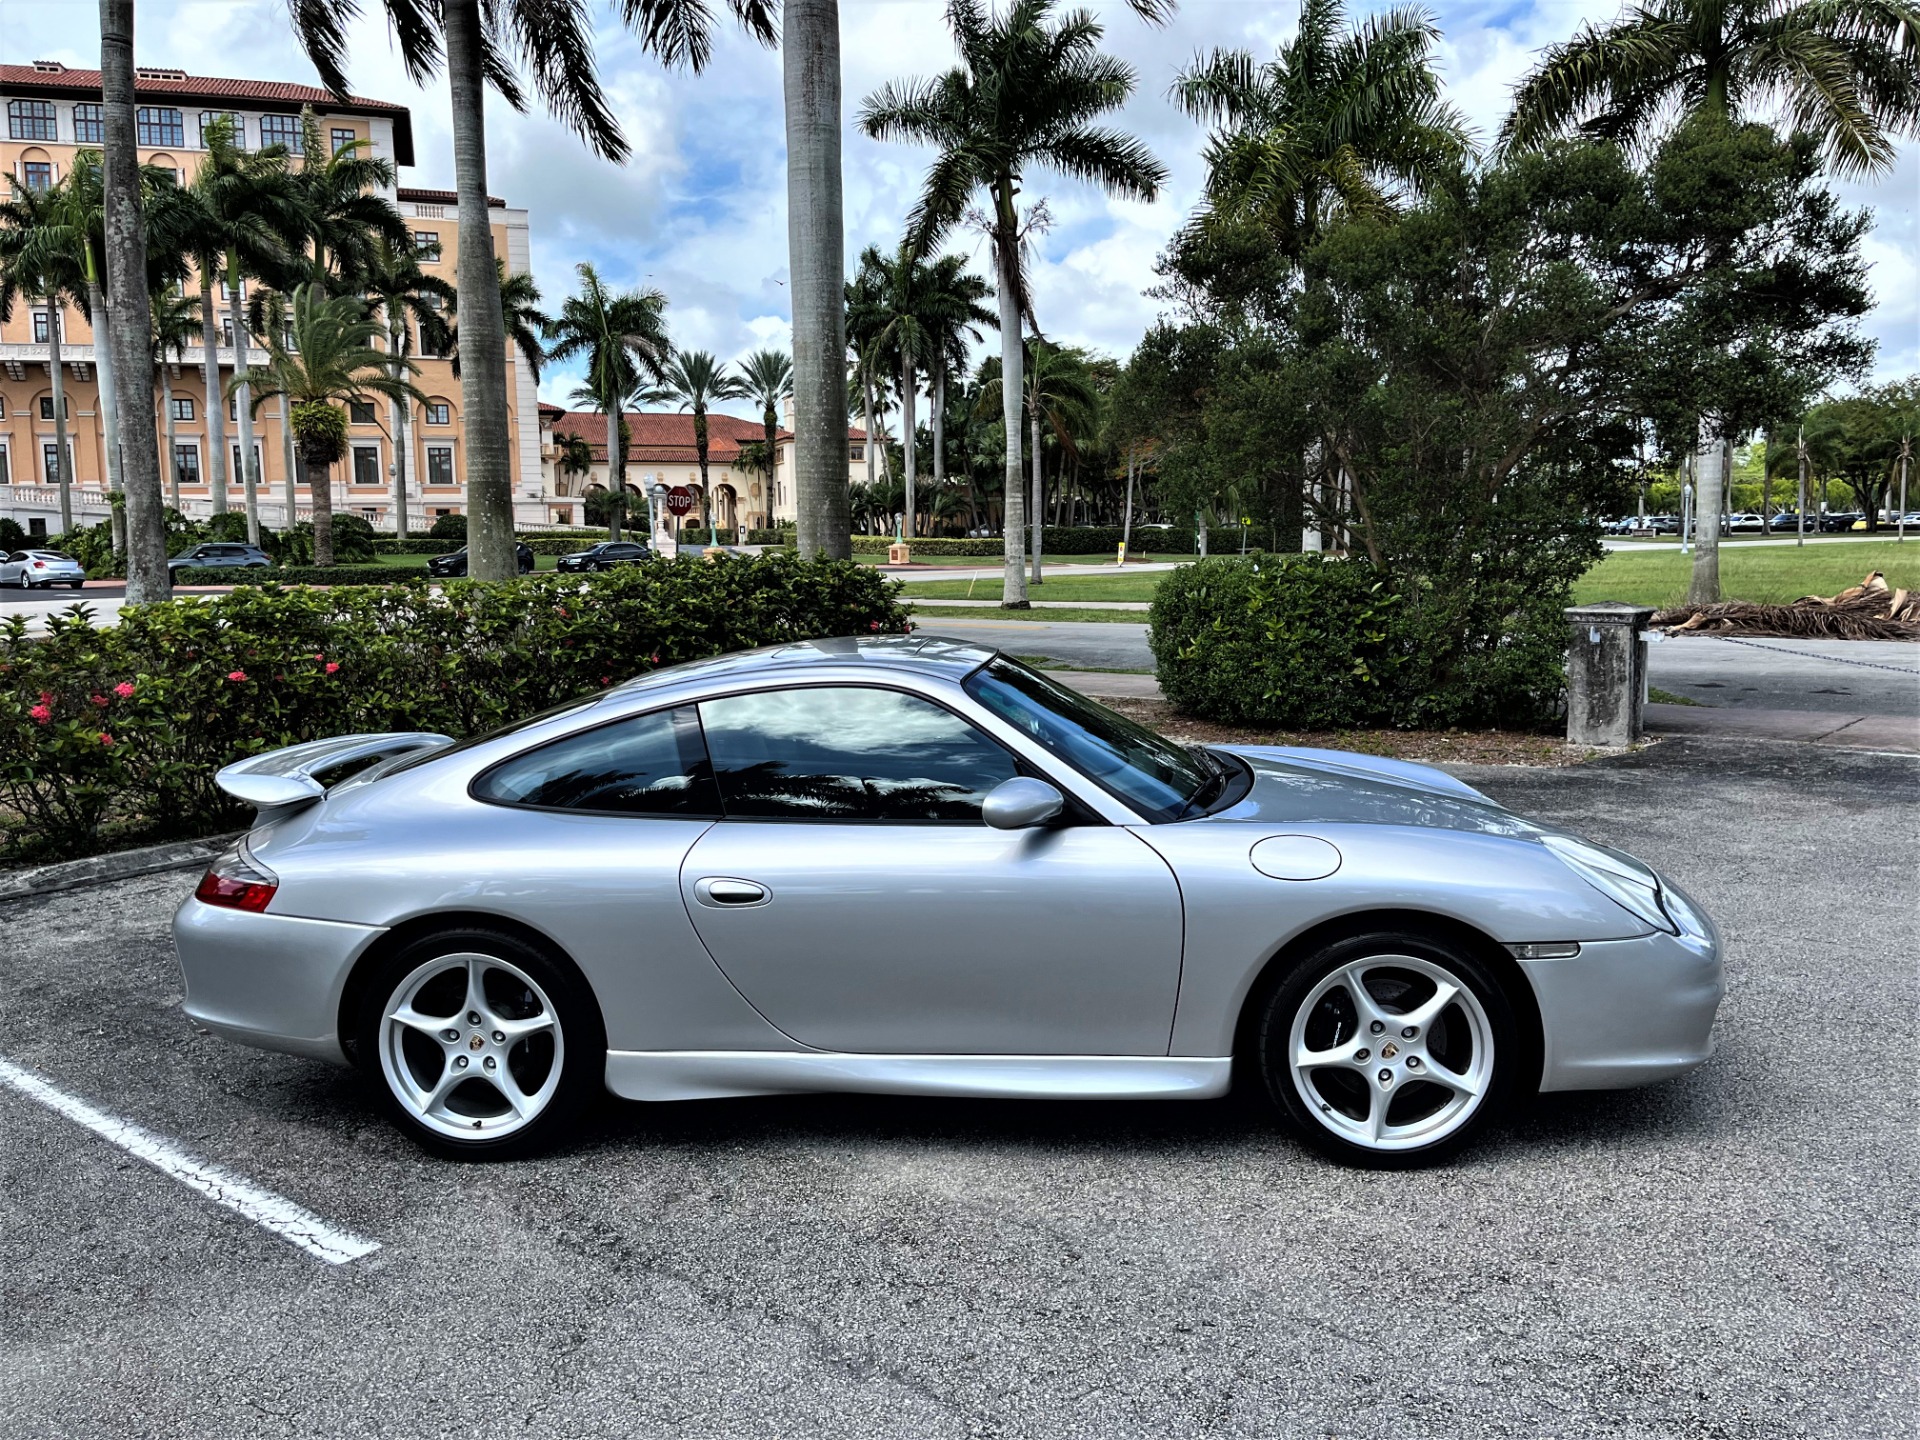 Used 2002 Porsche 911 Carrera for sale Sold at The Gables Sports Cars in Miami FL 33146 1